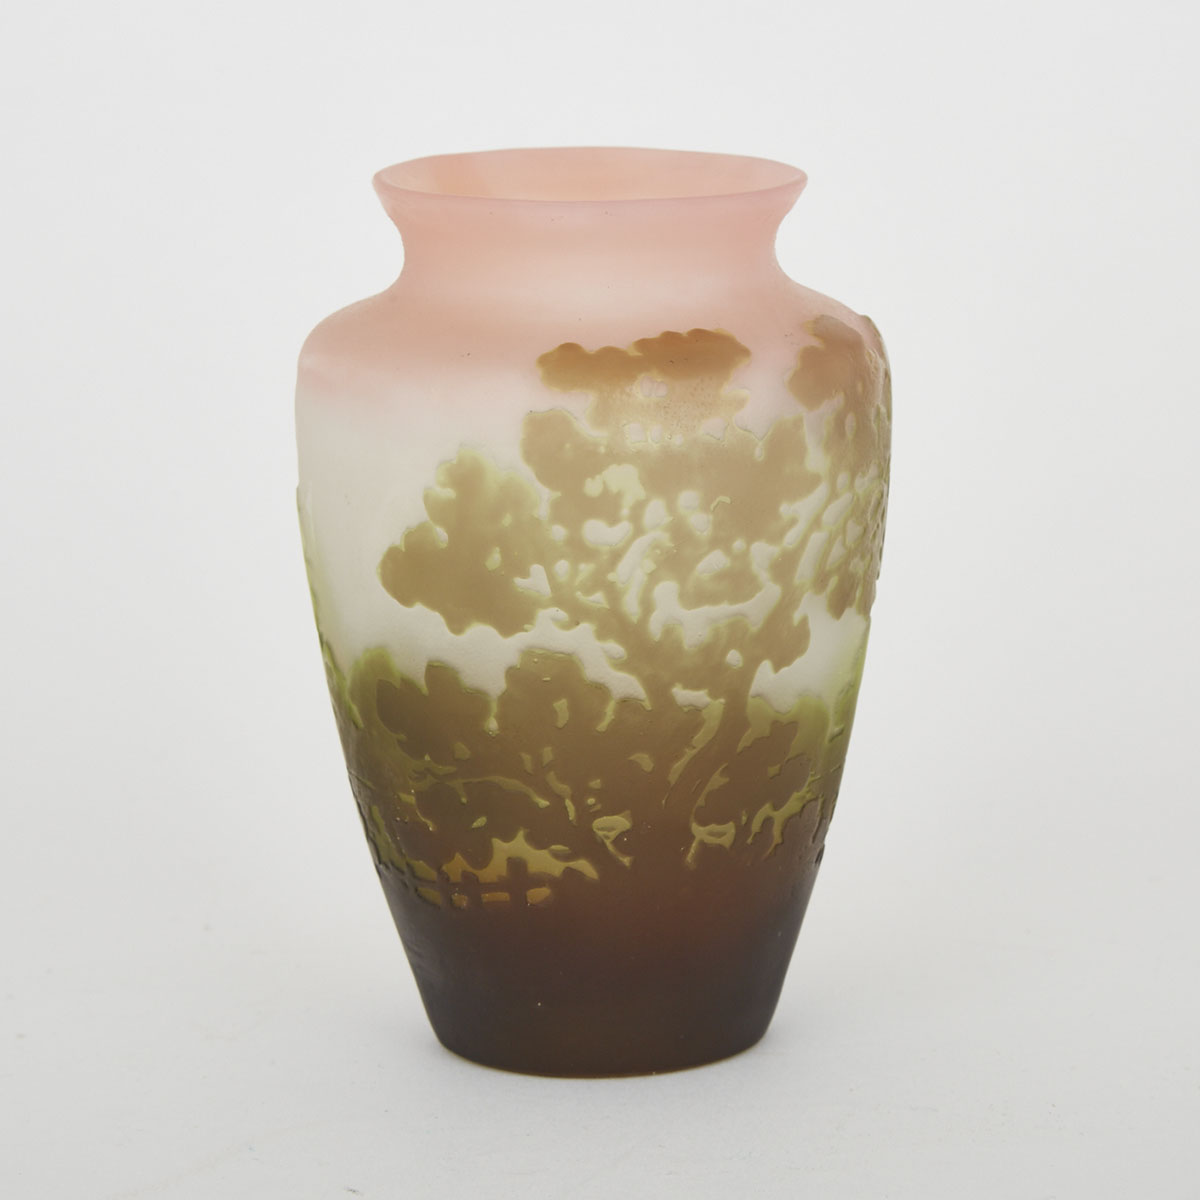 Gallé Cameo Glass Landscape Vase, early 20th century